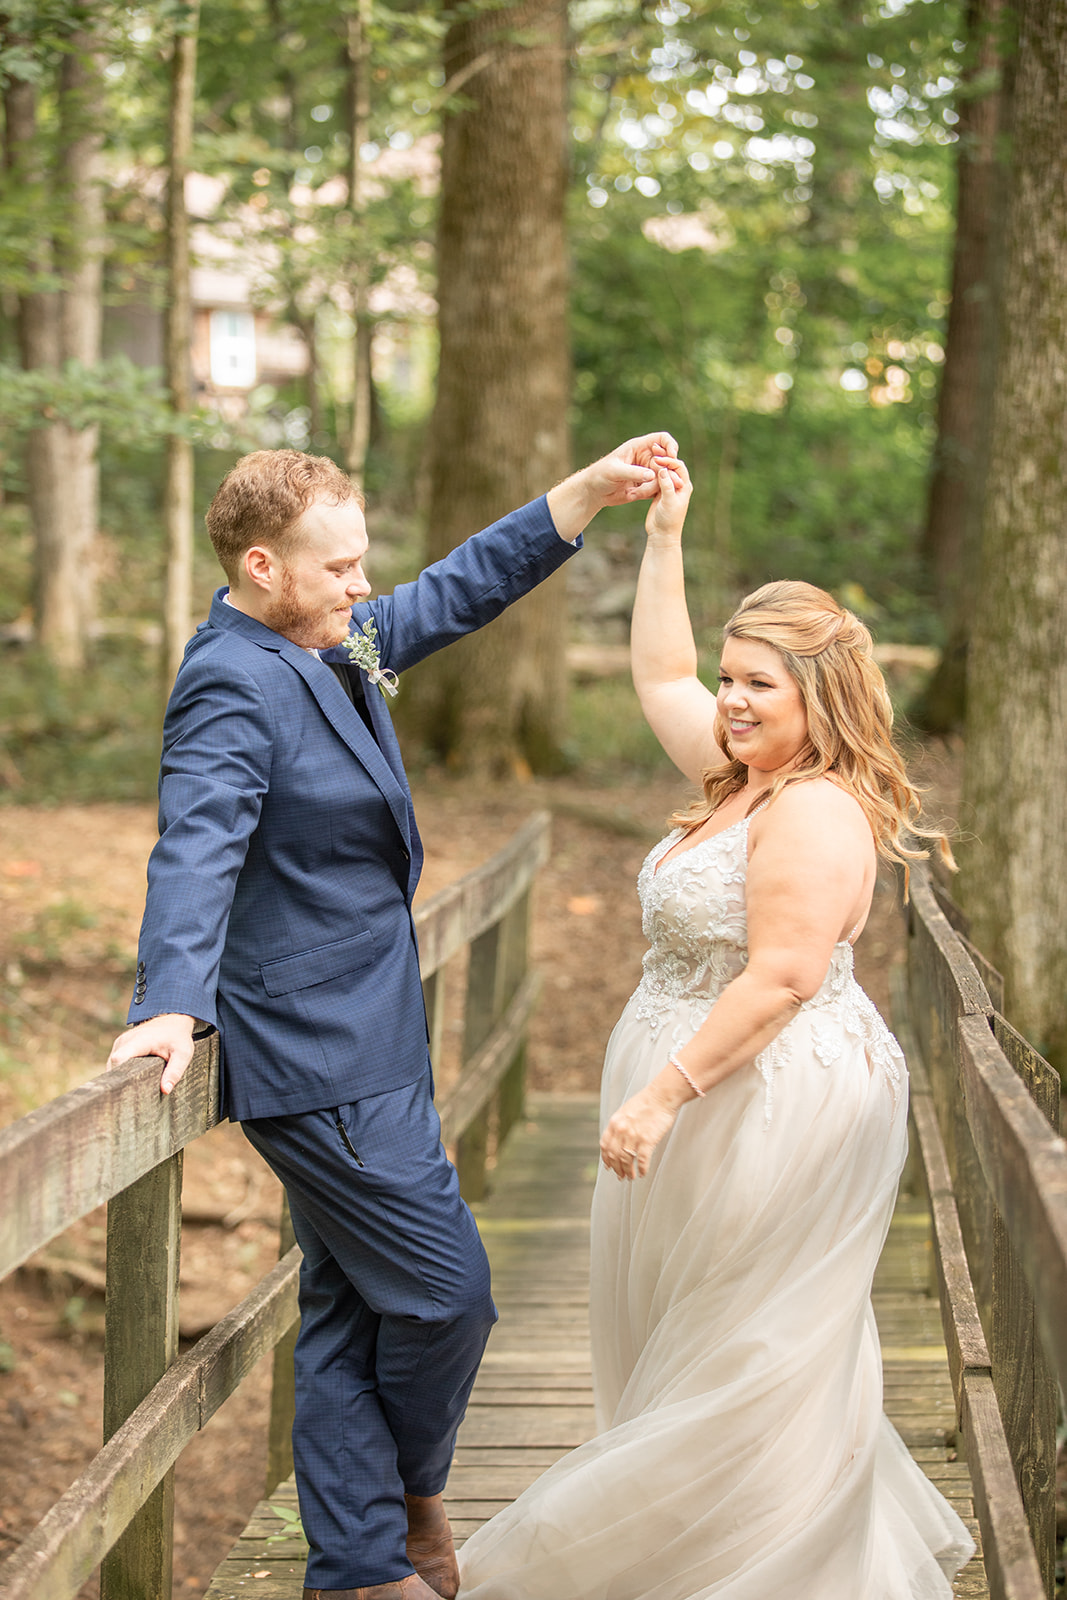 Charming, Rustic Wedding at the Cedars of Lebanon State Park featured on Nashville Bride Guide